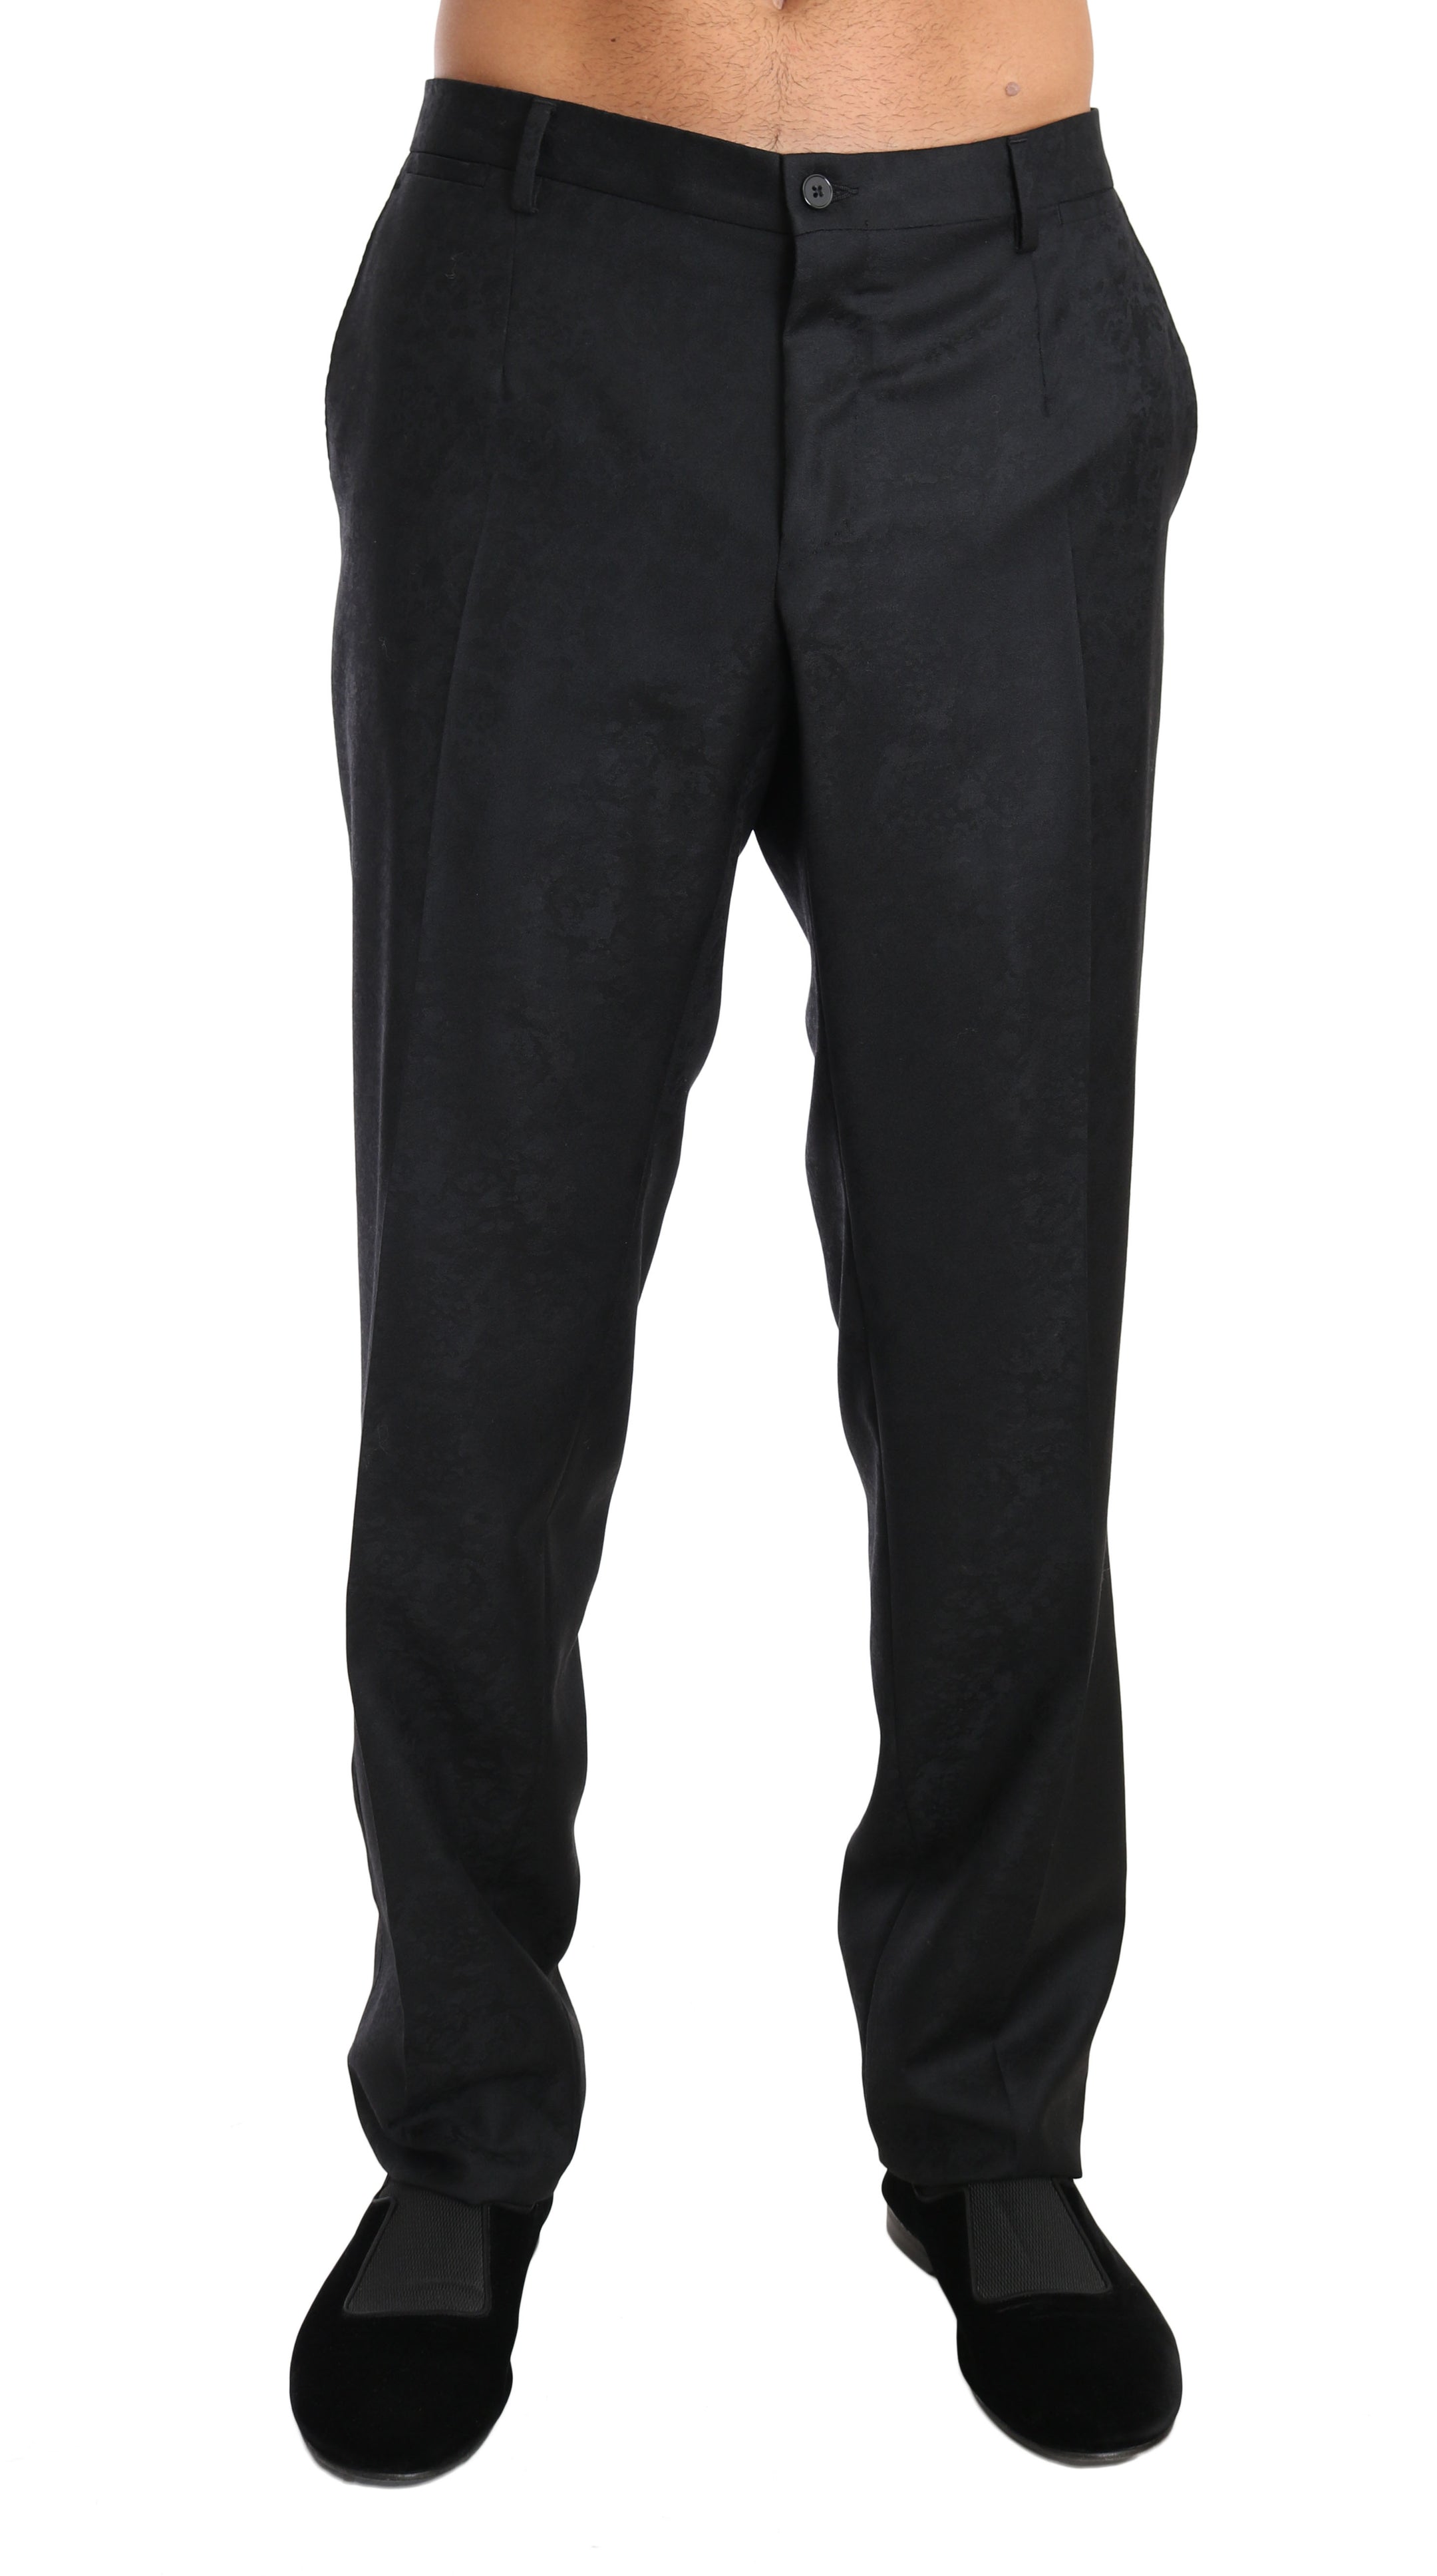 Buy Gray Cotton Patterned Formal Trousers by Dolce & Gabbana